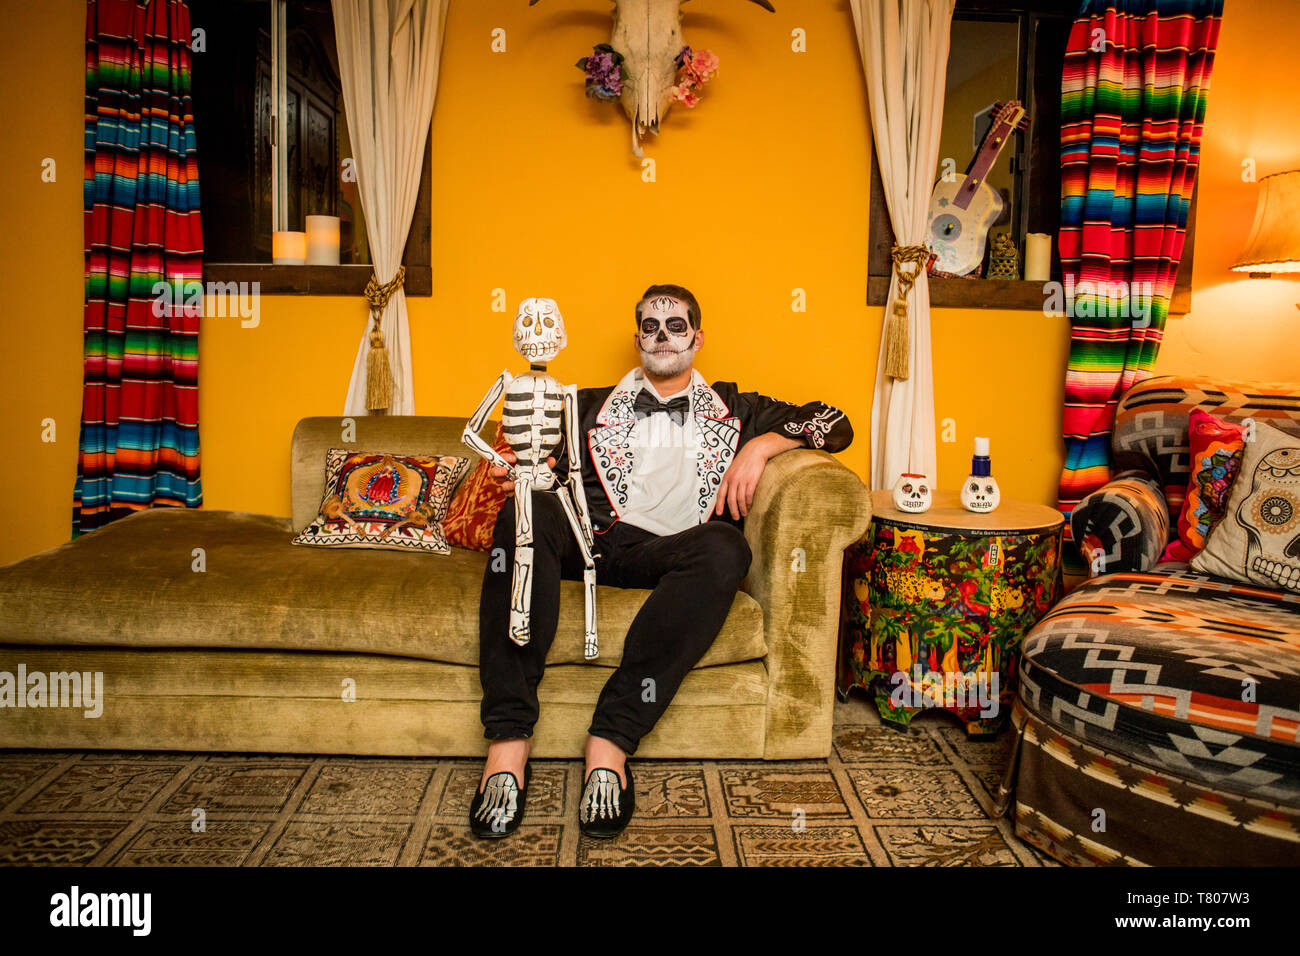 Man in Dia de los Muertos makeup and costume, Day of the Dead celebration in the desert, California, United States of America, North America Stock Photo